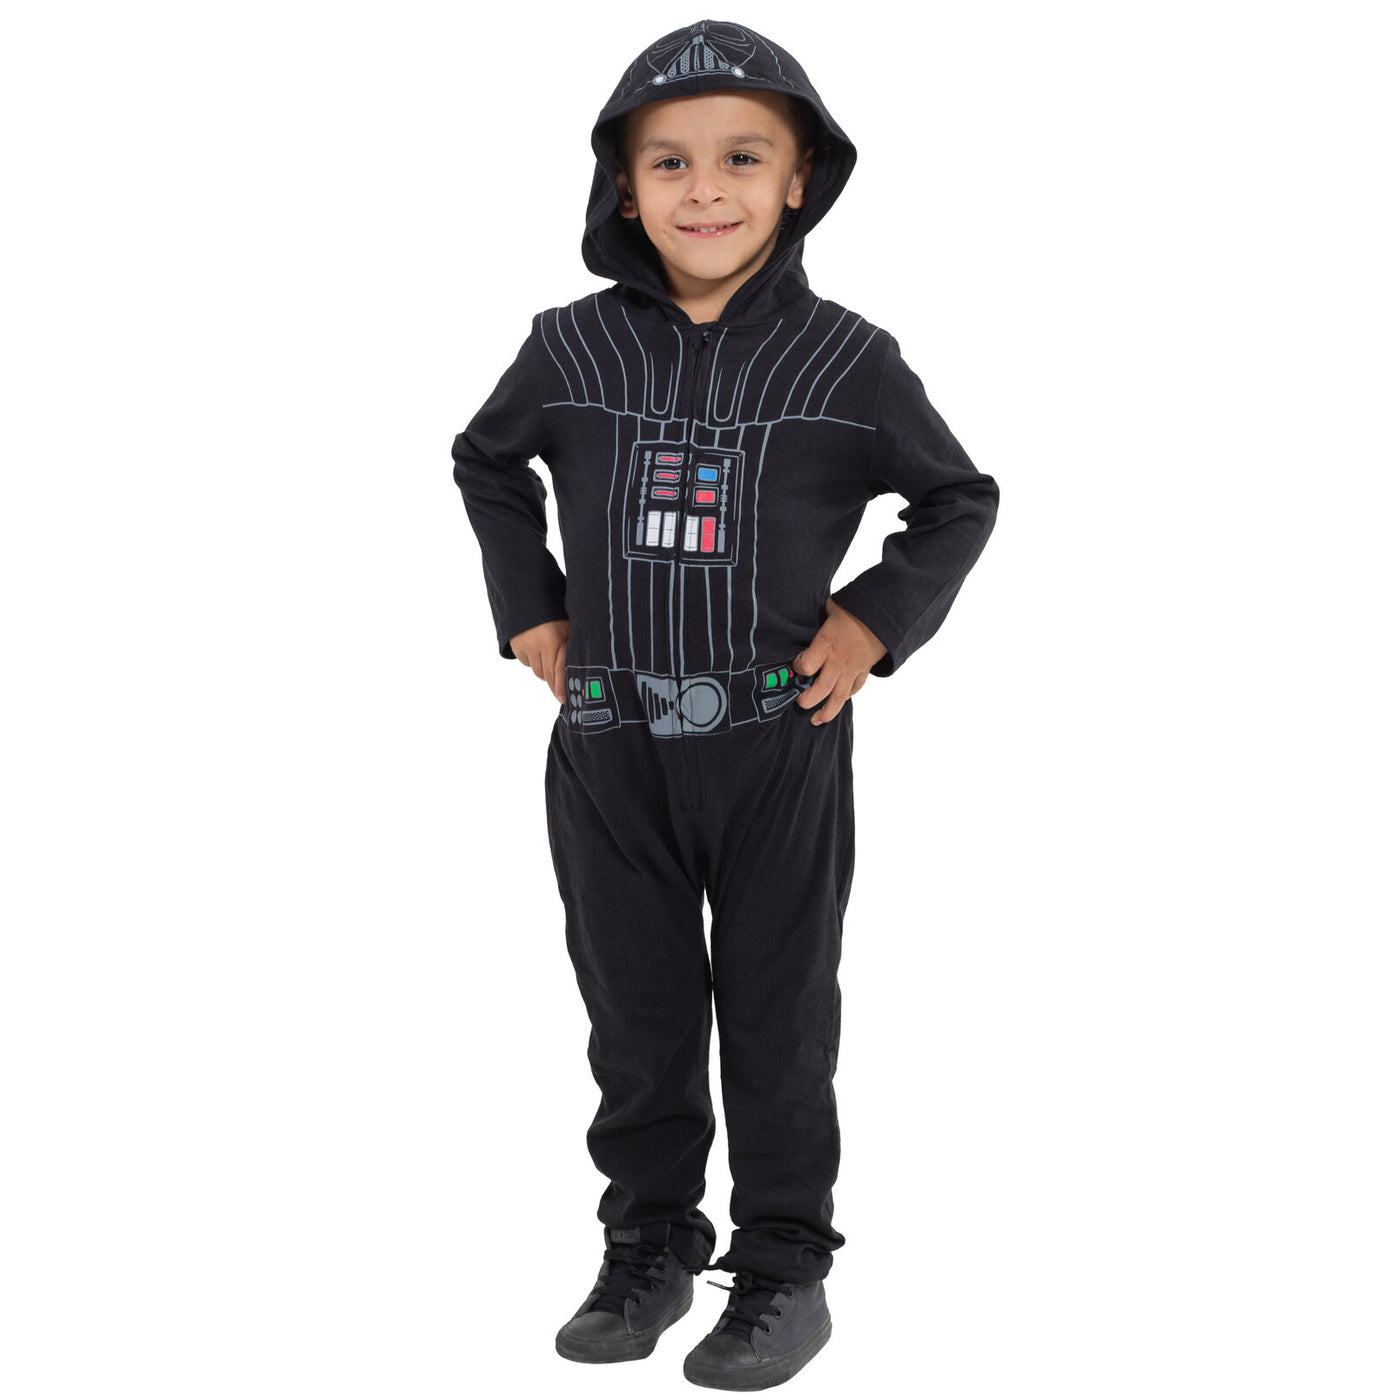 Star Wars Darth Vader Zip Up Cosplay Coverall and Cape